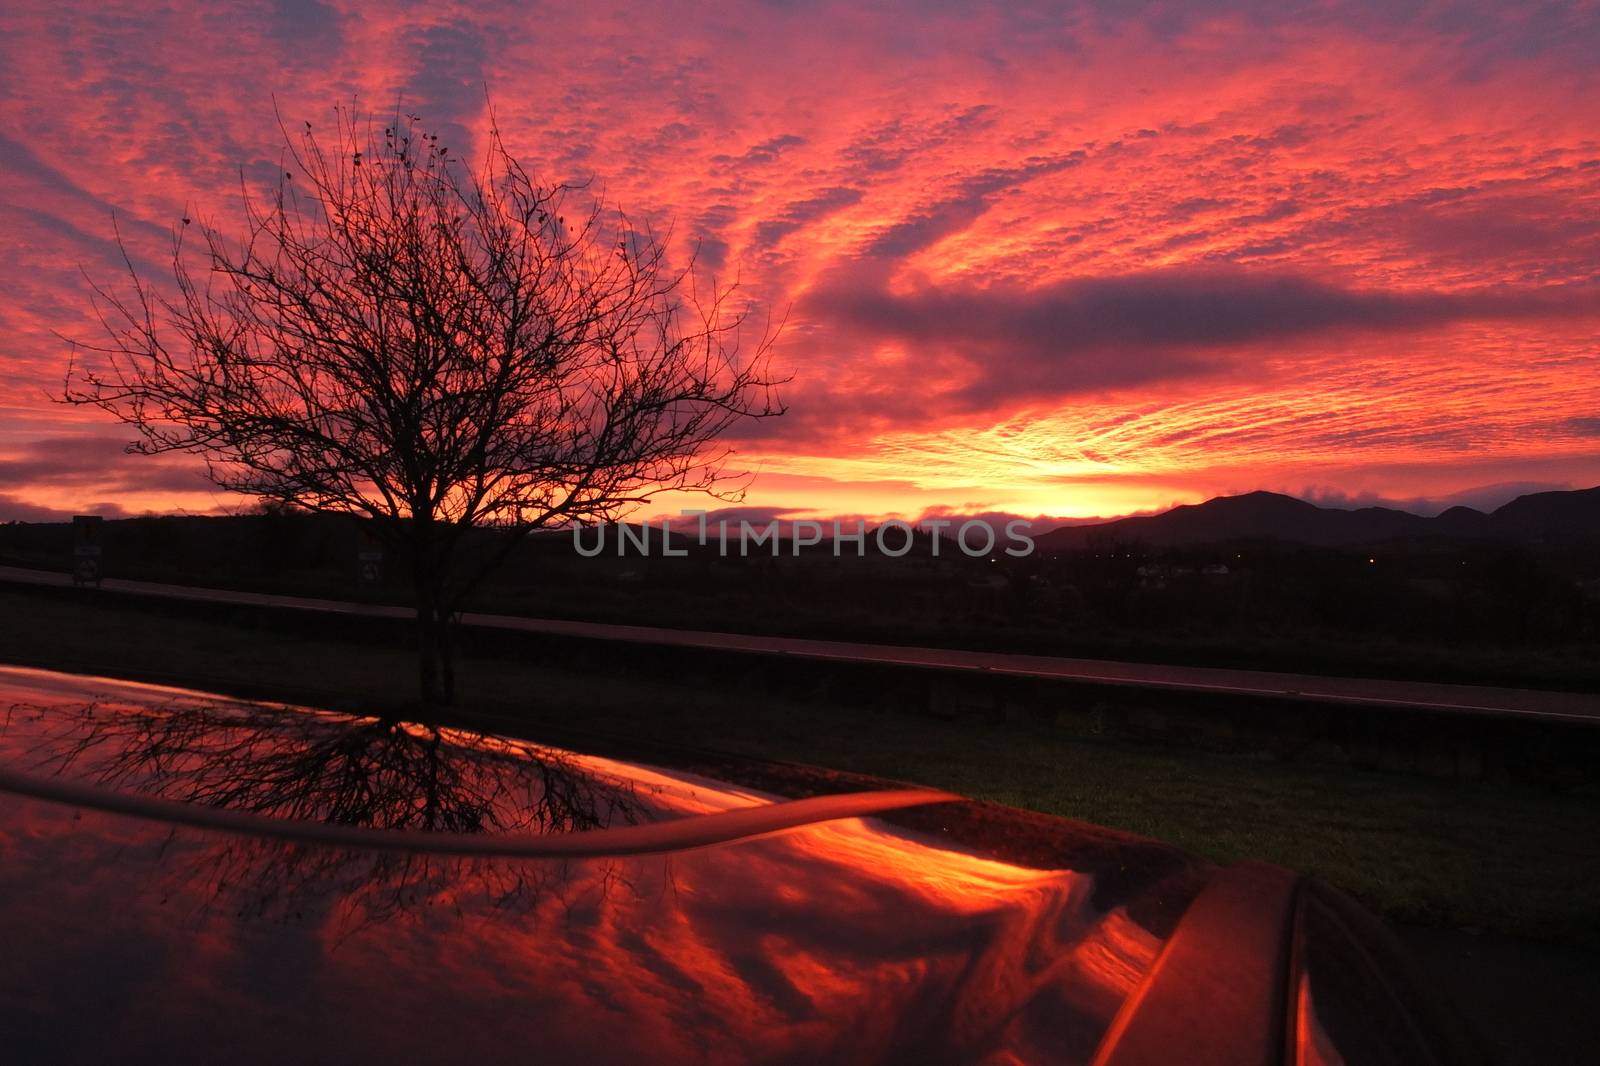 Cloudy Sunrise in Killarney with reflection on the car roof